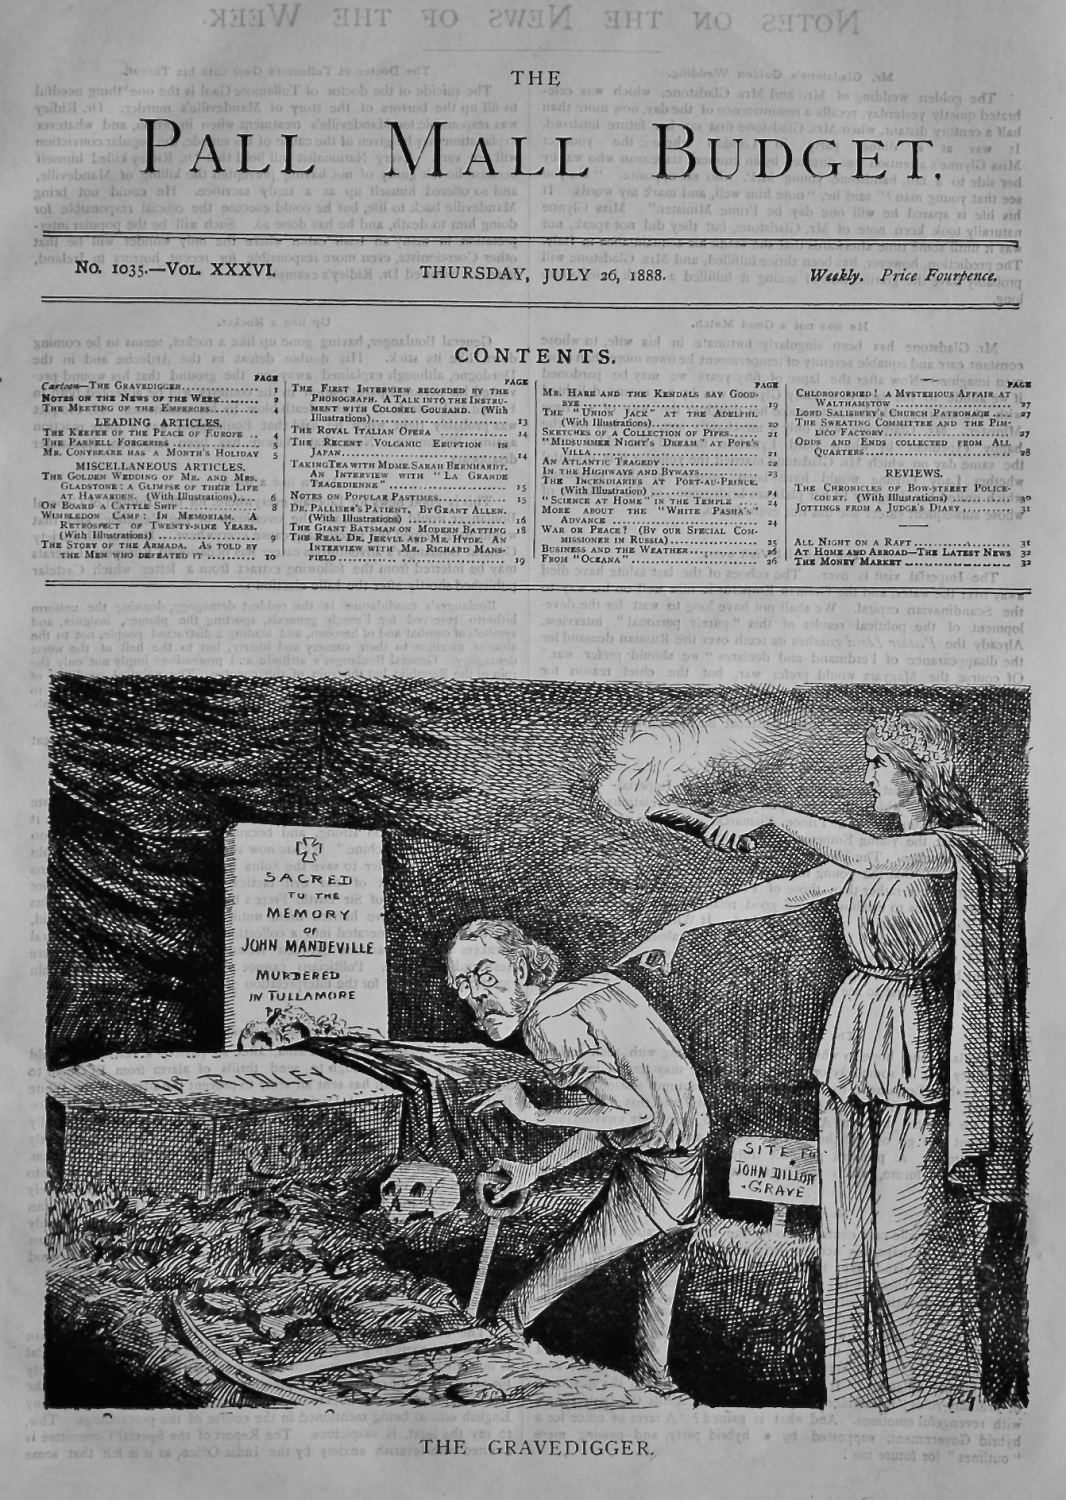 The Pall Mall Budget, July 26th, 1888, (Front Page)   The Gravedigger.